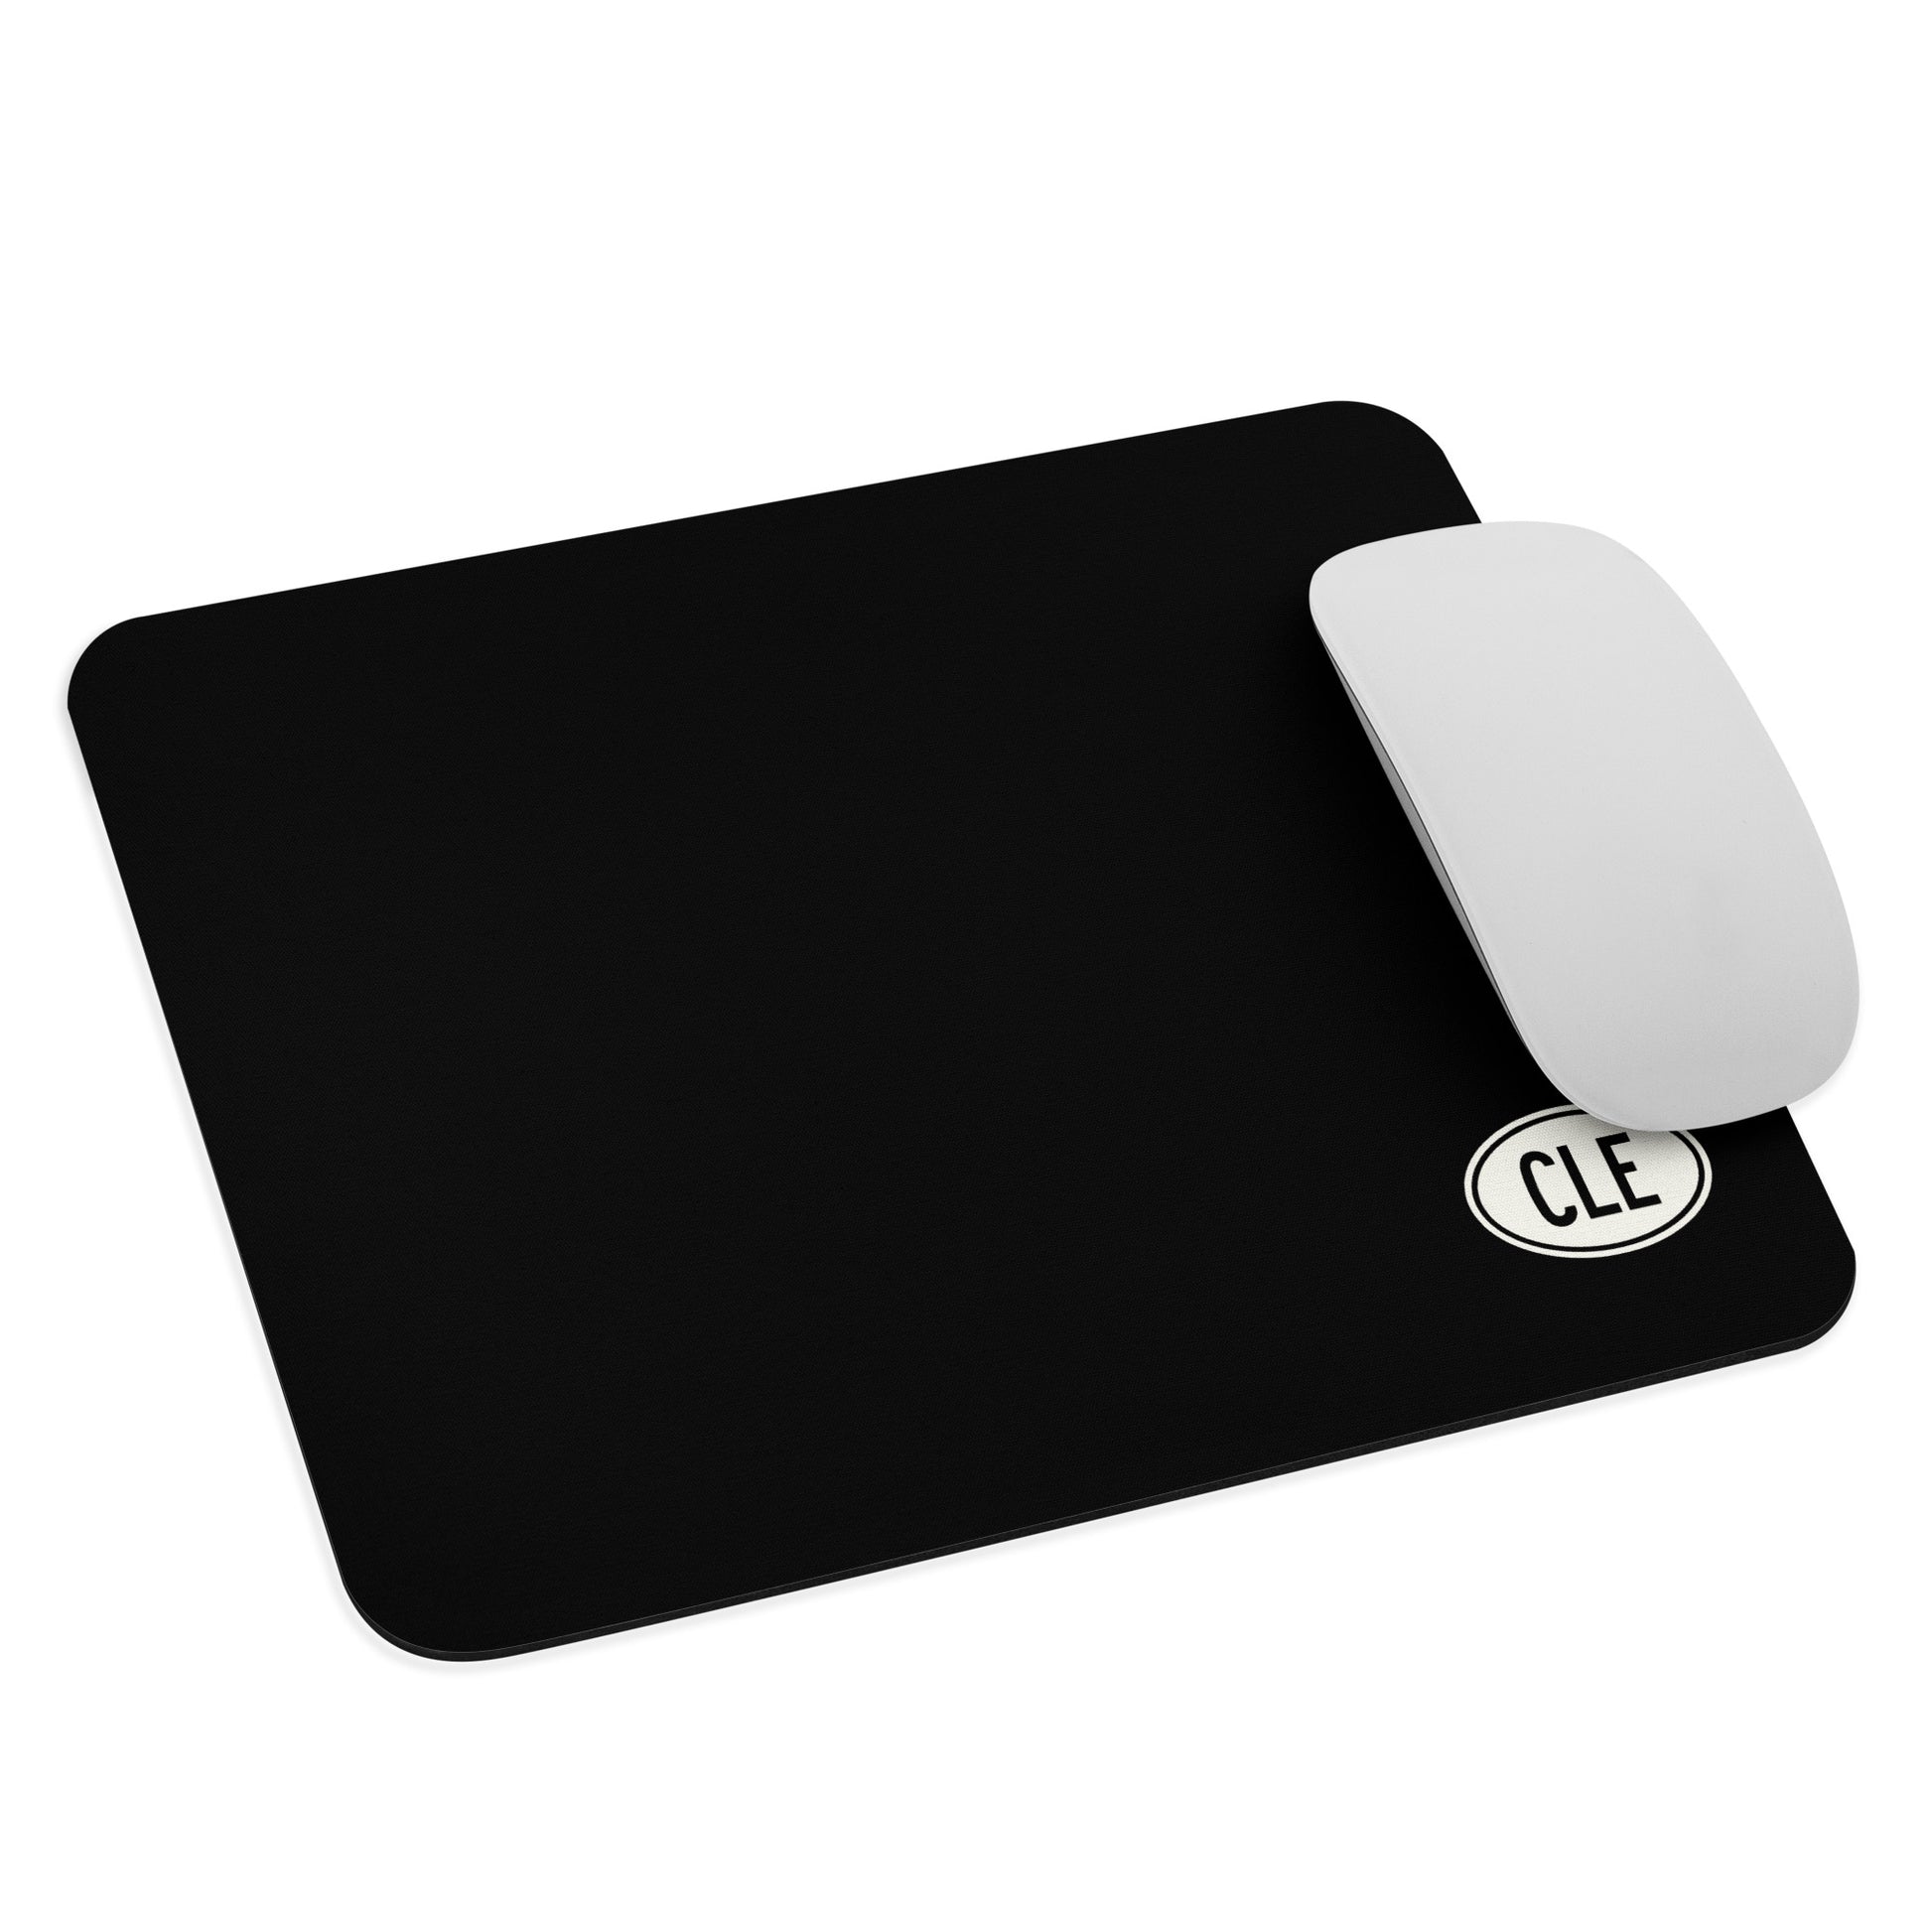 Unique Travel Gift Mouse Pad - White Oval • CLE Cleveland • YHM Designs - Image 03